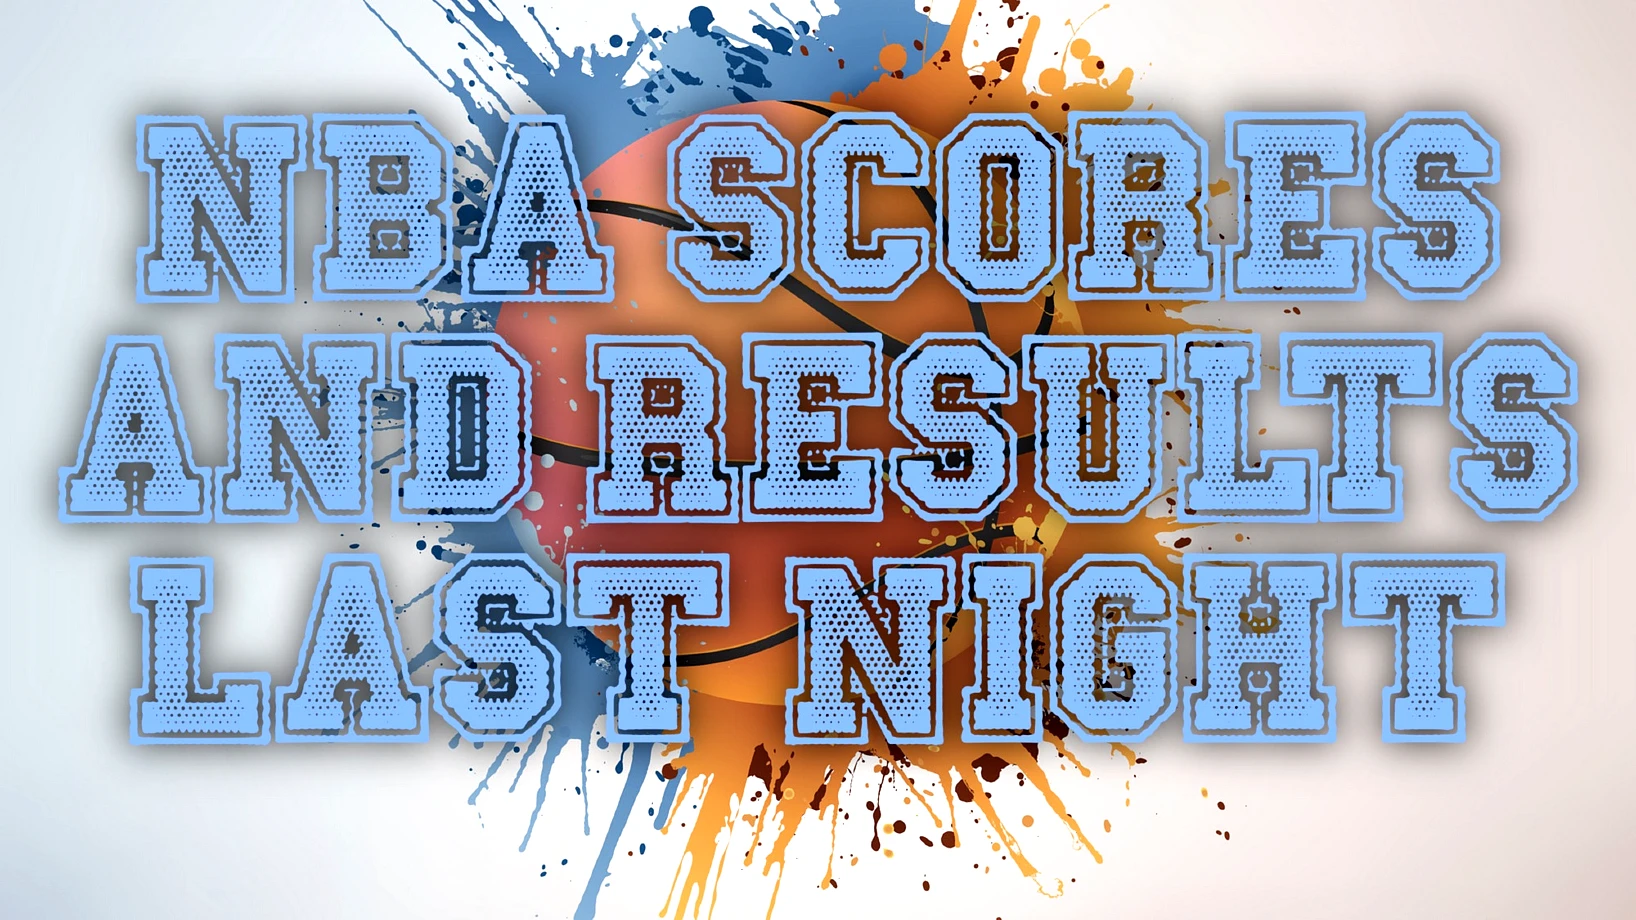 NBA scores and result last night (Jan. 25)